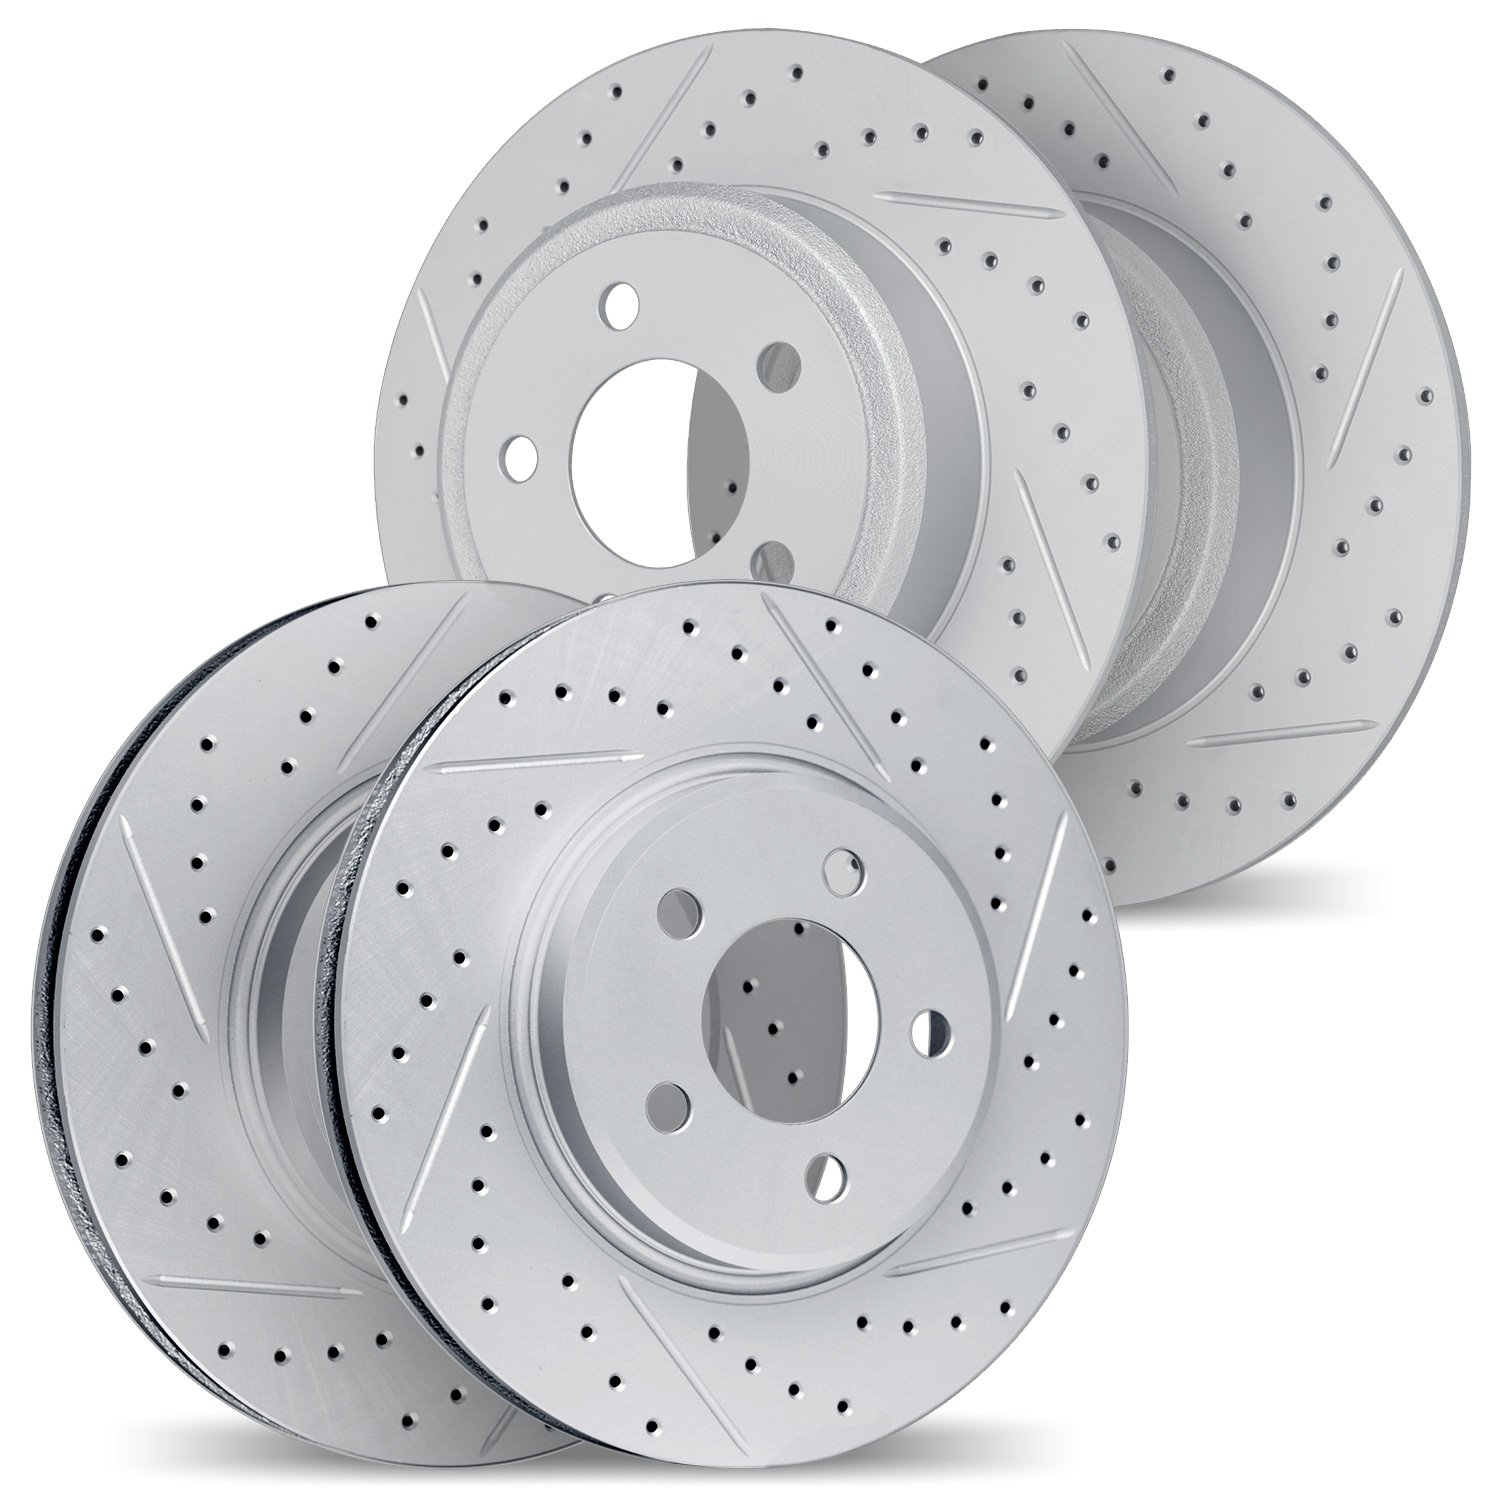 2004-63045 Geoperformance Drilled/Slotted Brake Rotors, Fits Select Mercedes-Benz, Position: Front and Rear